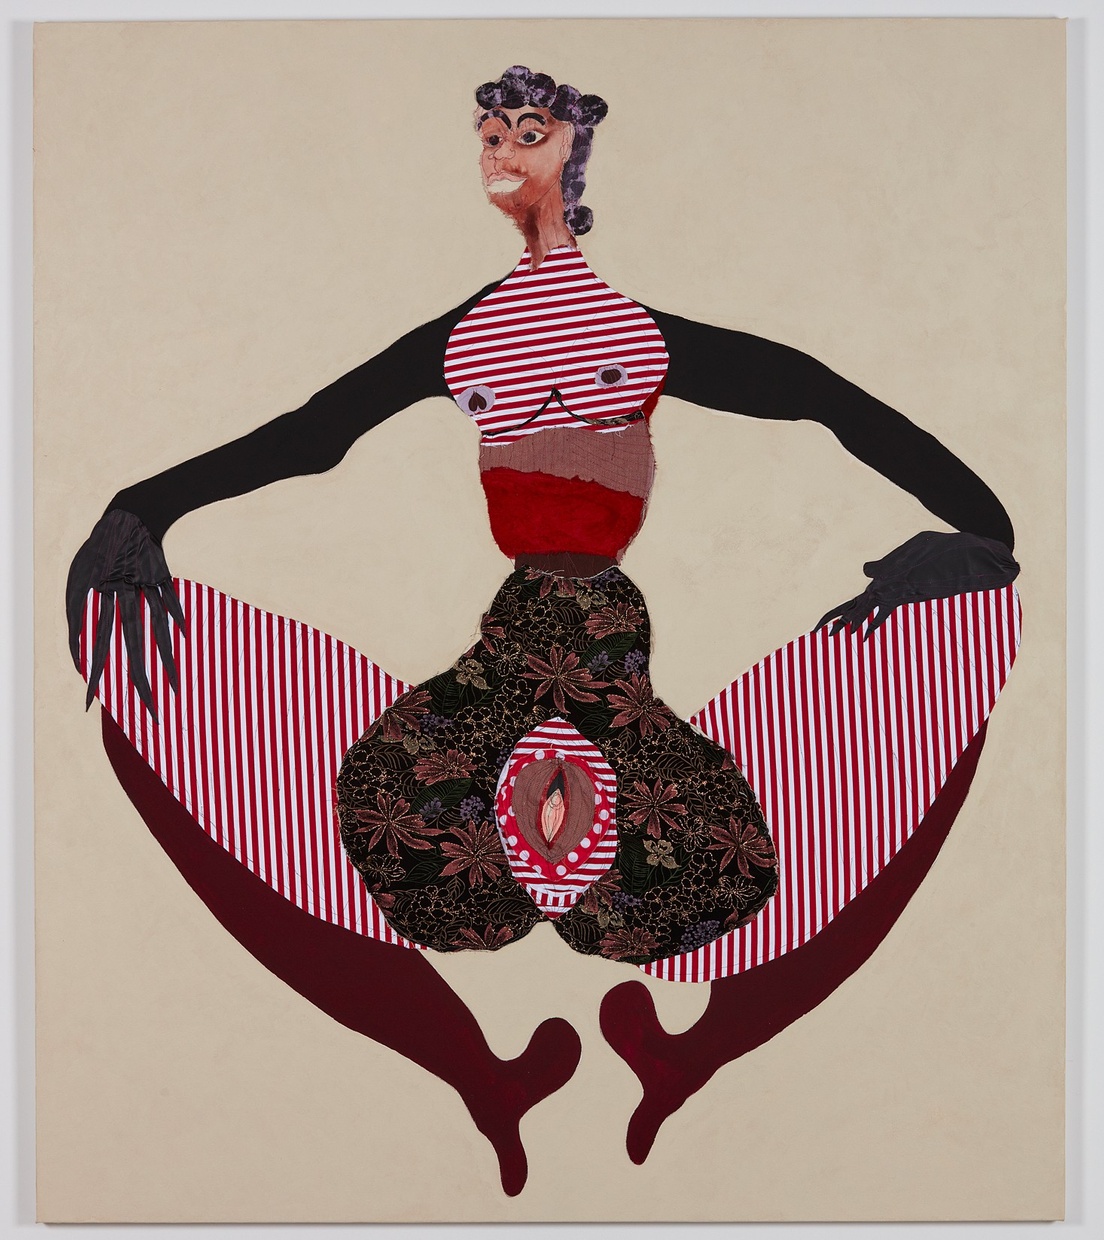 A large, abstract female figure made of different patterned material holding her knees apart, displaying her vagina. 